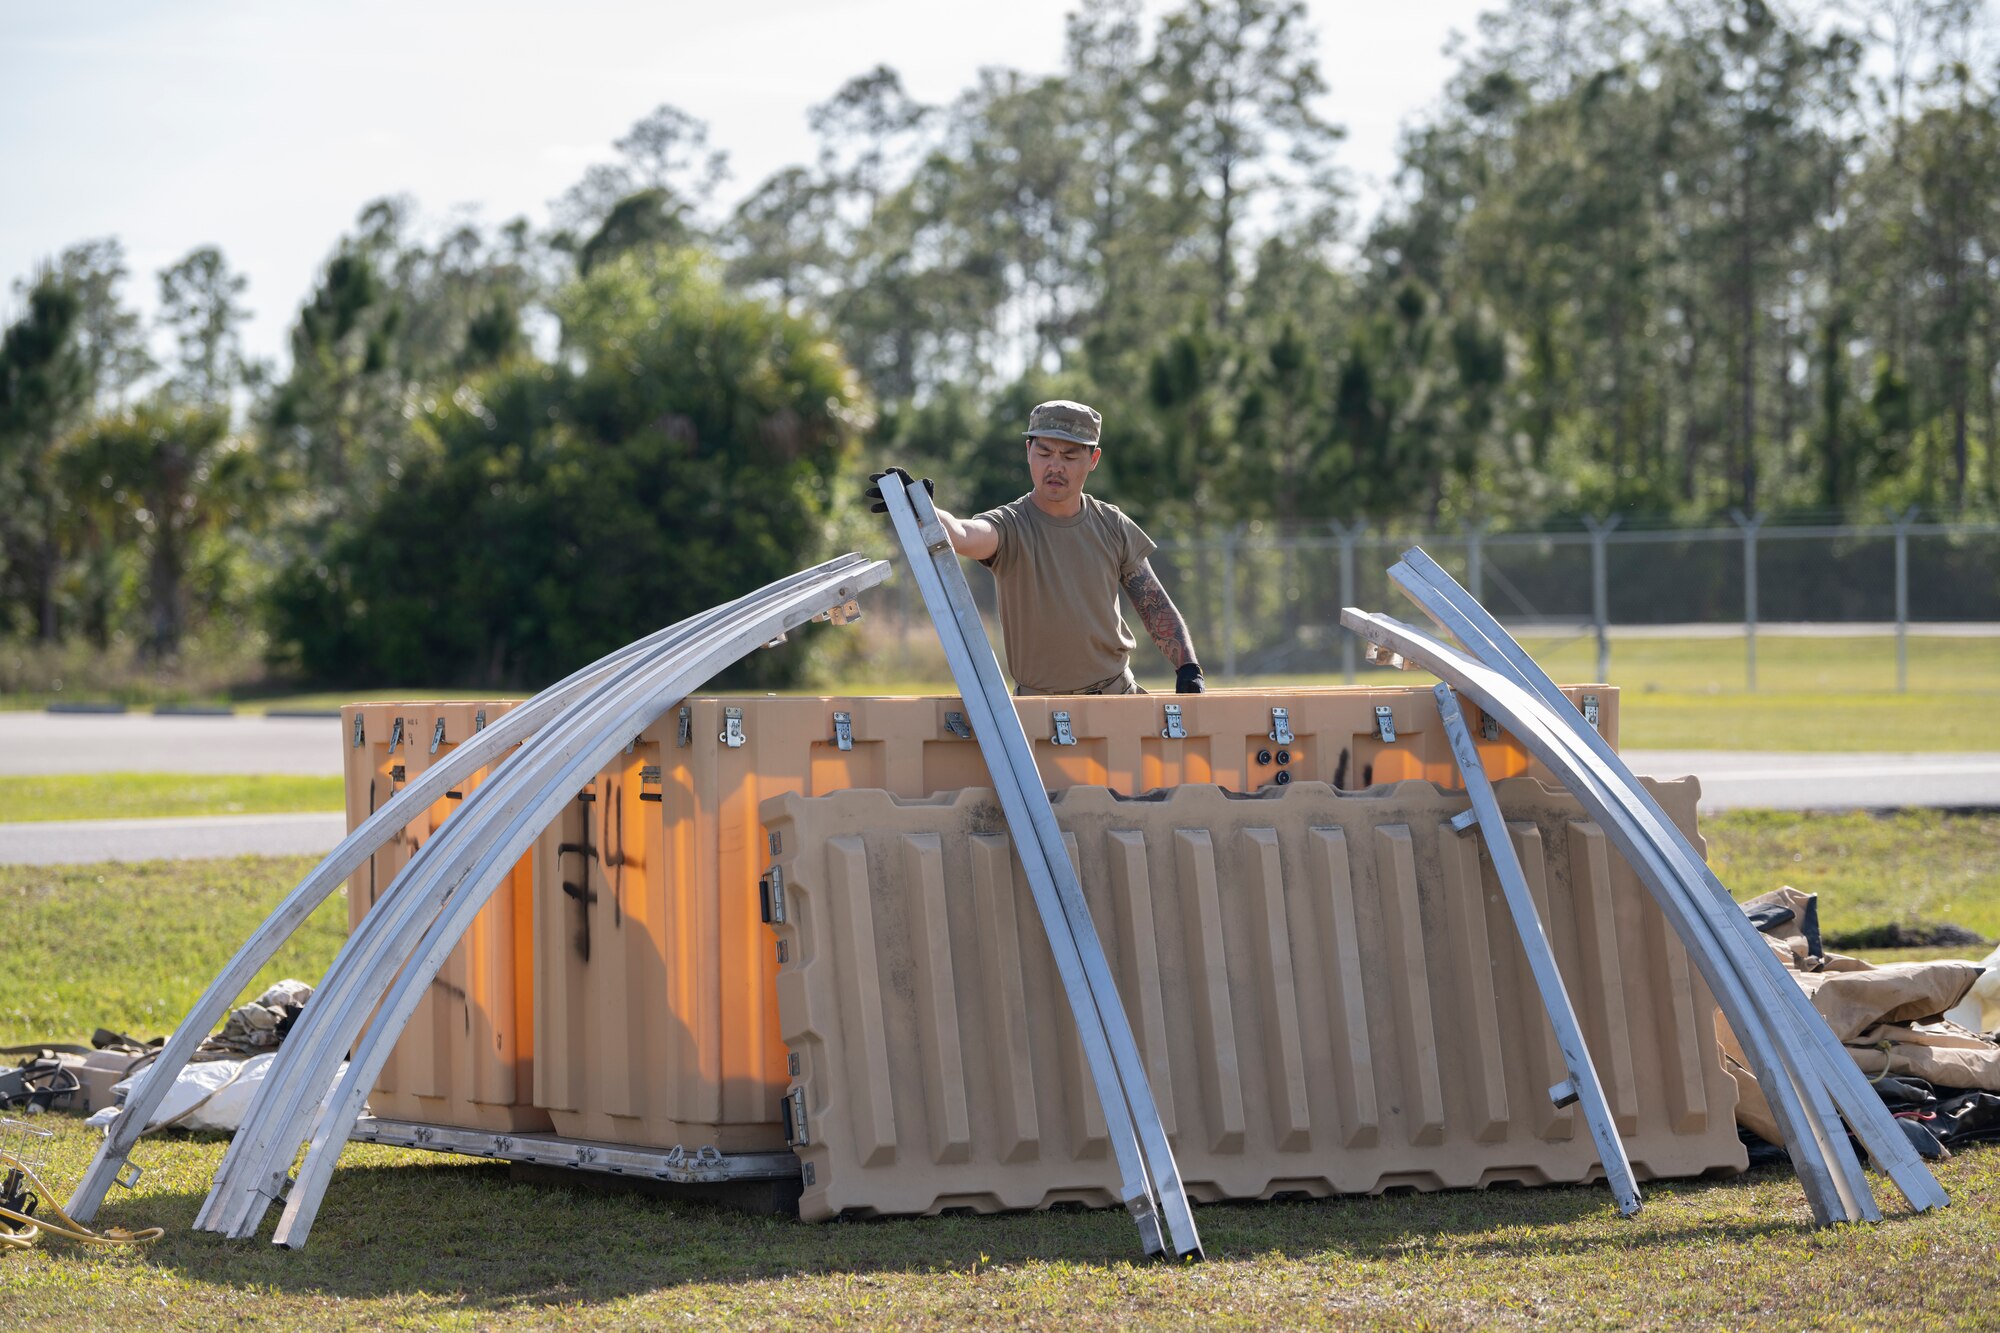 U.S. Air Force Airman 1st Class, Wenlong Wang, 23rd Civil Engineer Squadron structural apprentice, unloads a container at Avon Park Air Force Range, Florida, April 8, 2024. Airmen packaged shelters into transportable containers, ensuring swift deployment and seamless reassembly. Built upon Air Combat Command's directive to assert air power in contested environments, Exercise Ready Tiger 24-1 aims to test and enhance the 23rd Wing’s proficiency in executing Lead Wing and Expeditionary Air Base concepts through Agile Combat Employment and command and control operations. (U.S. Air Force photo by Senior Airman Rachel Coates)